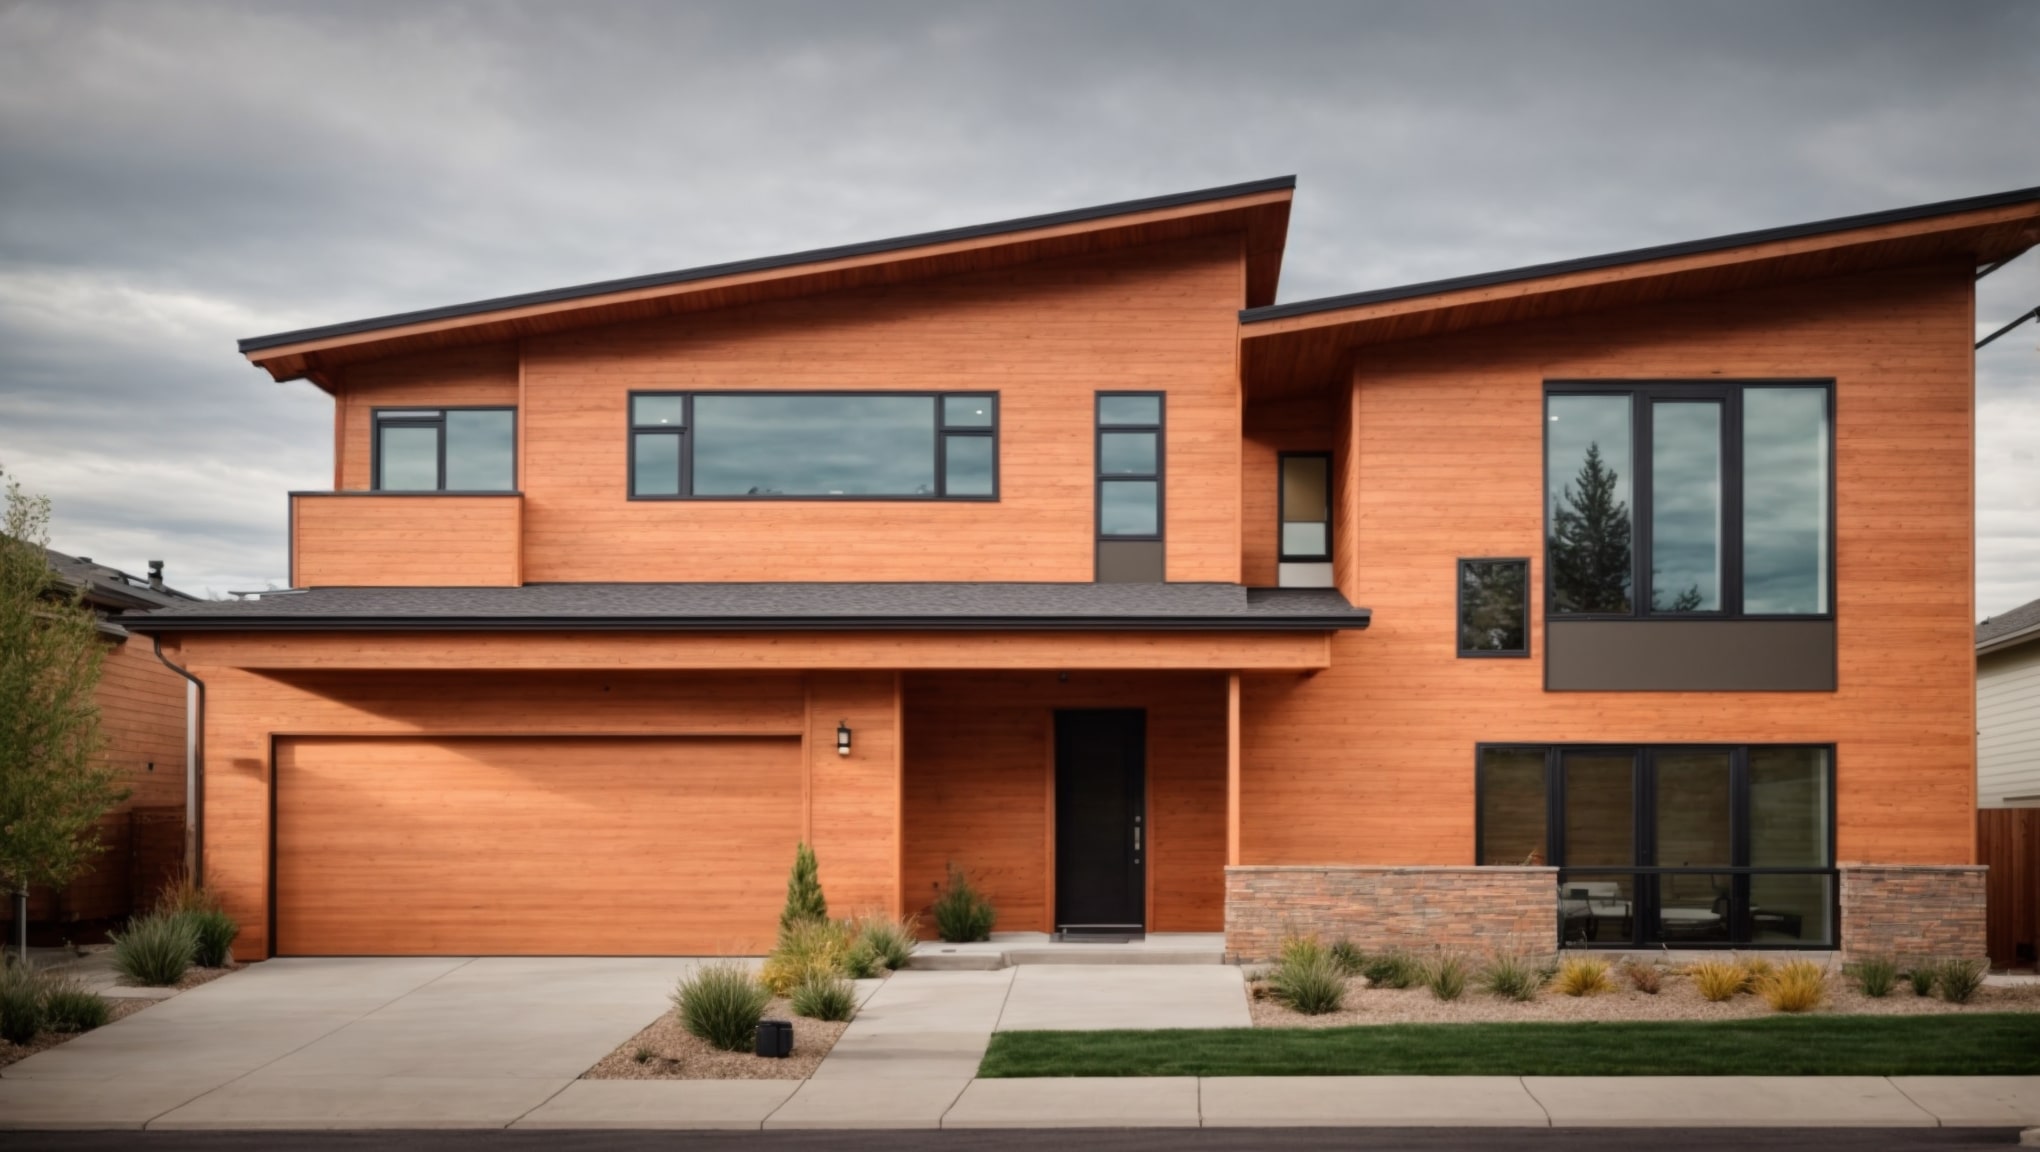 A sophisticated duplex in Longmont, Colorado, with LP Siding finish.